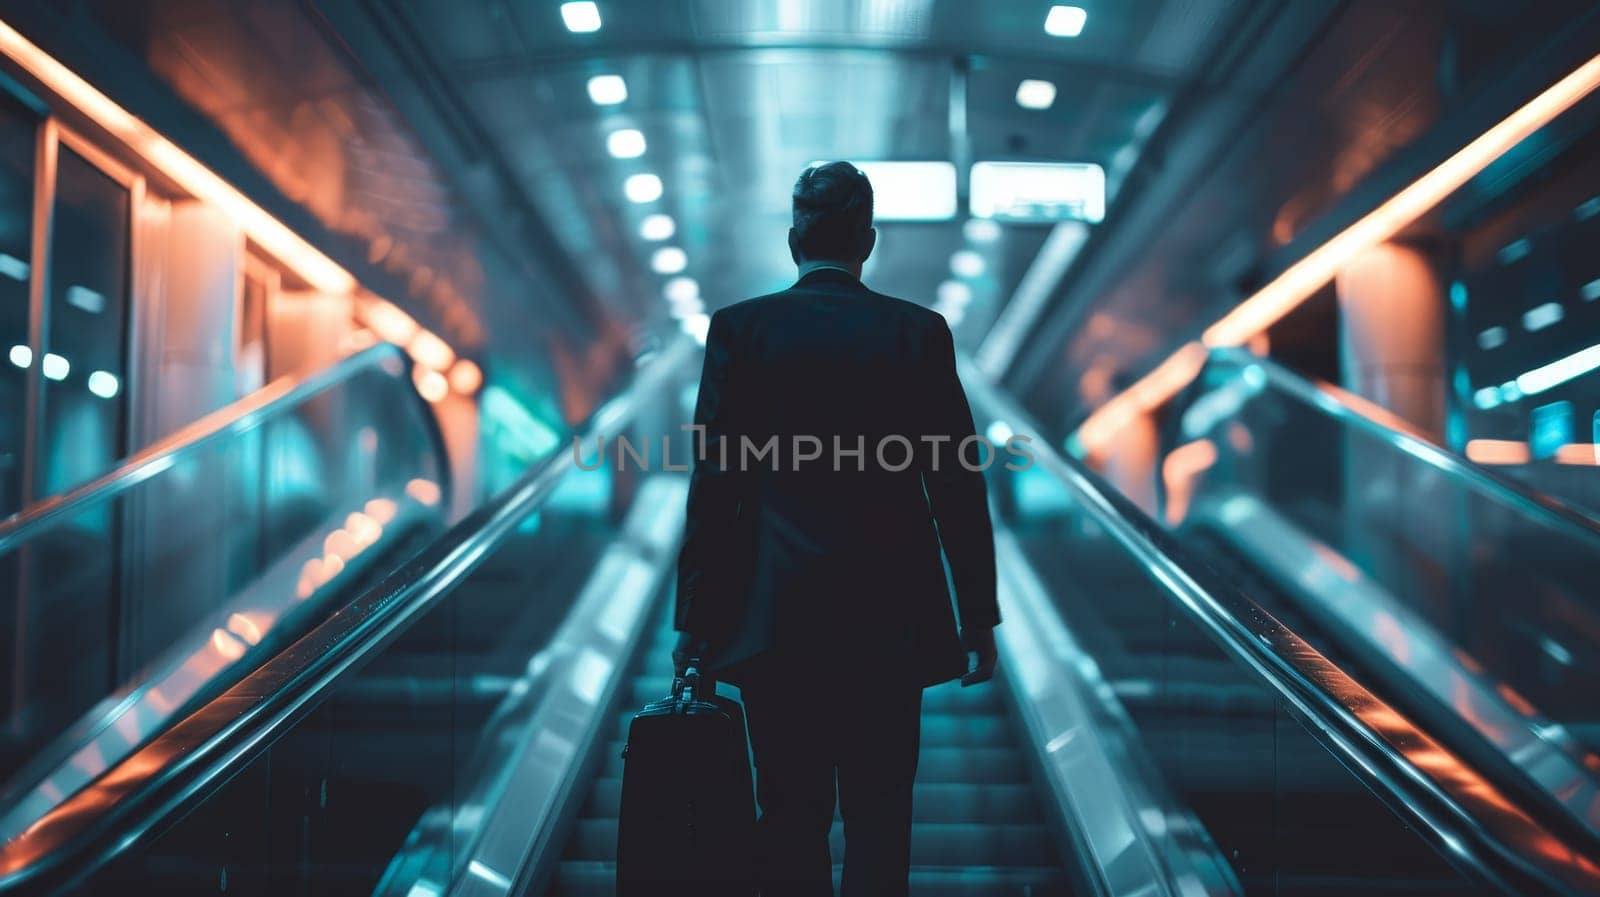 A man wearing a suit and carrying a briefcase is walking down an escalator by nijieimu